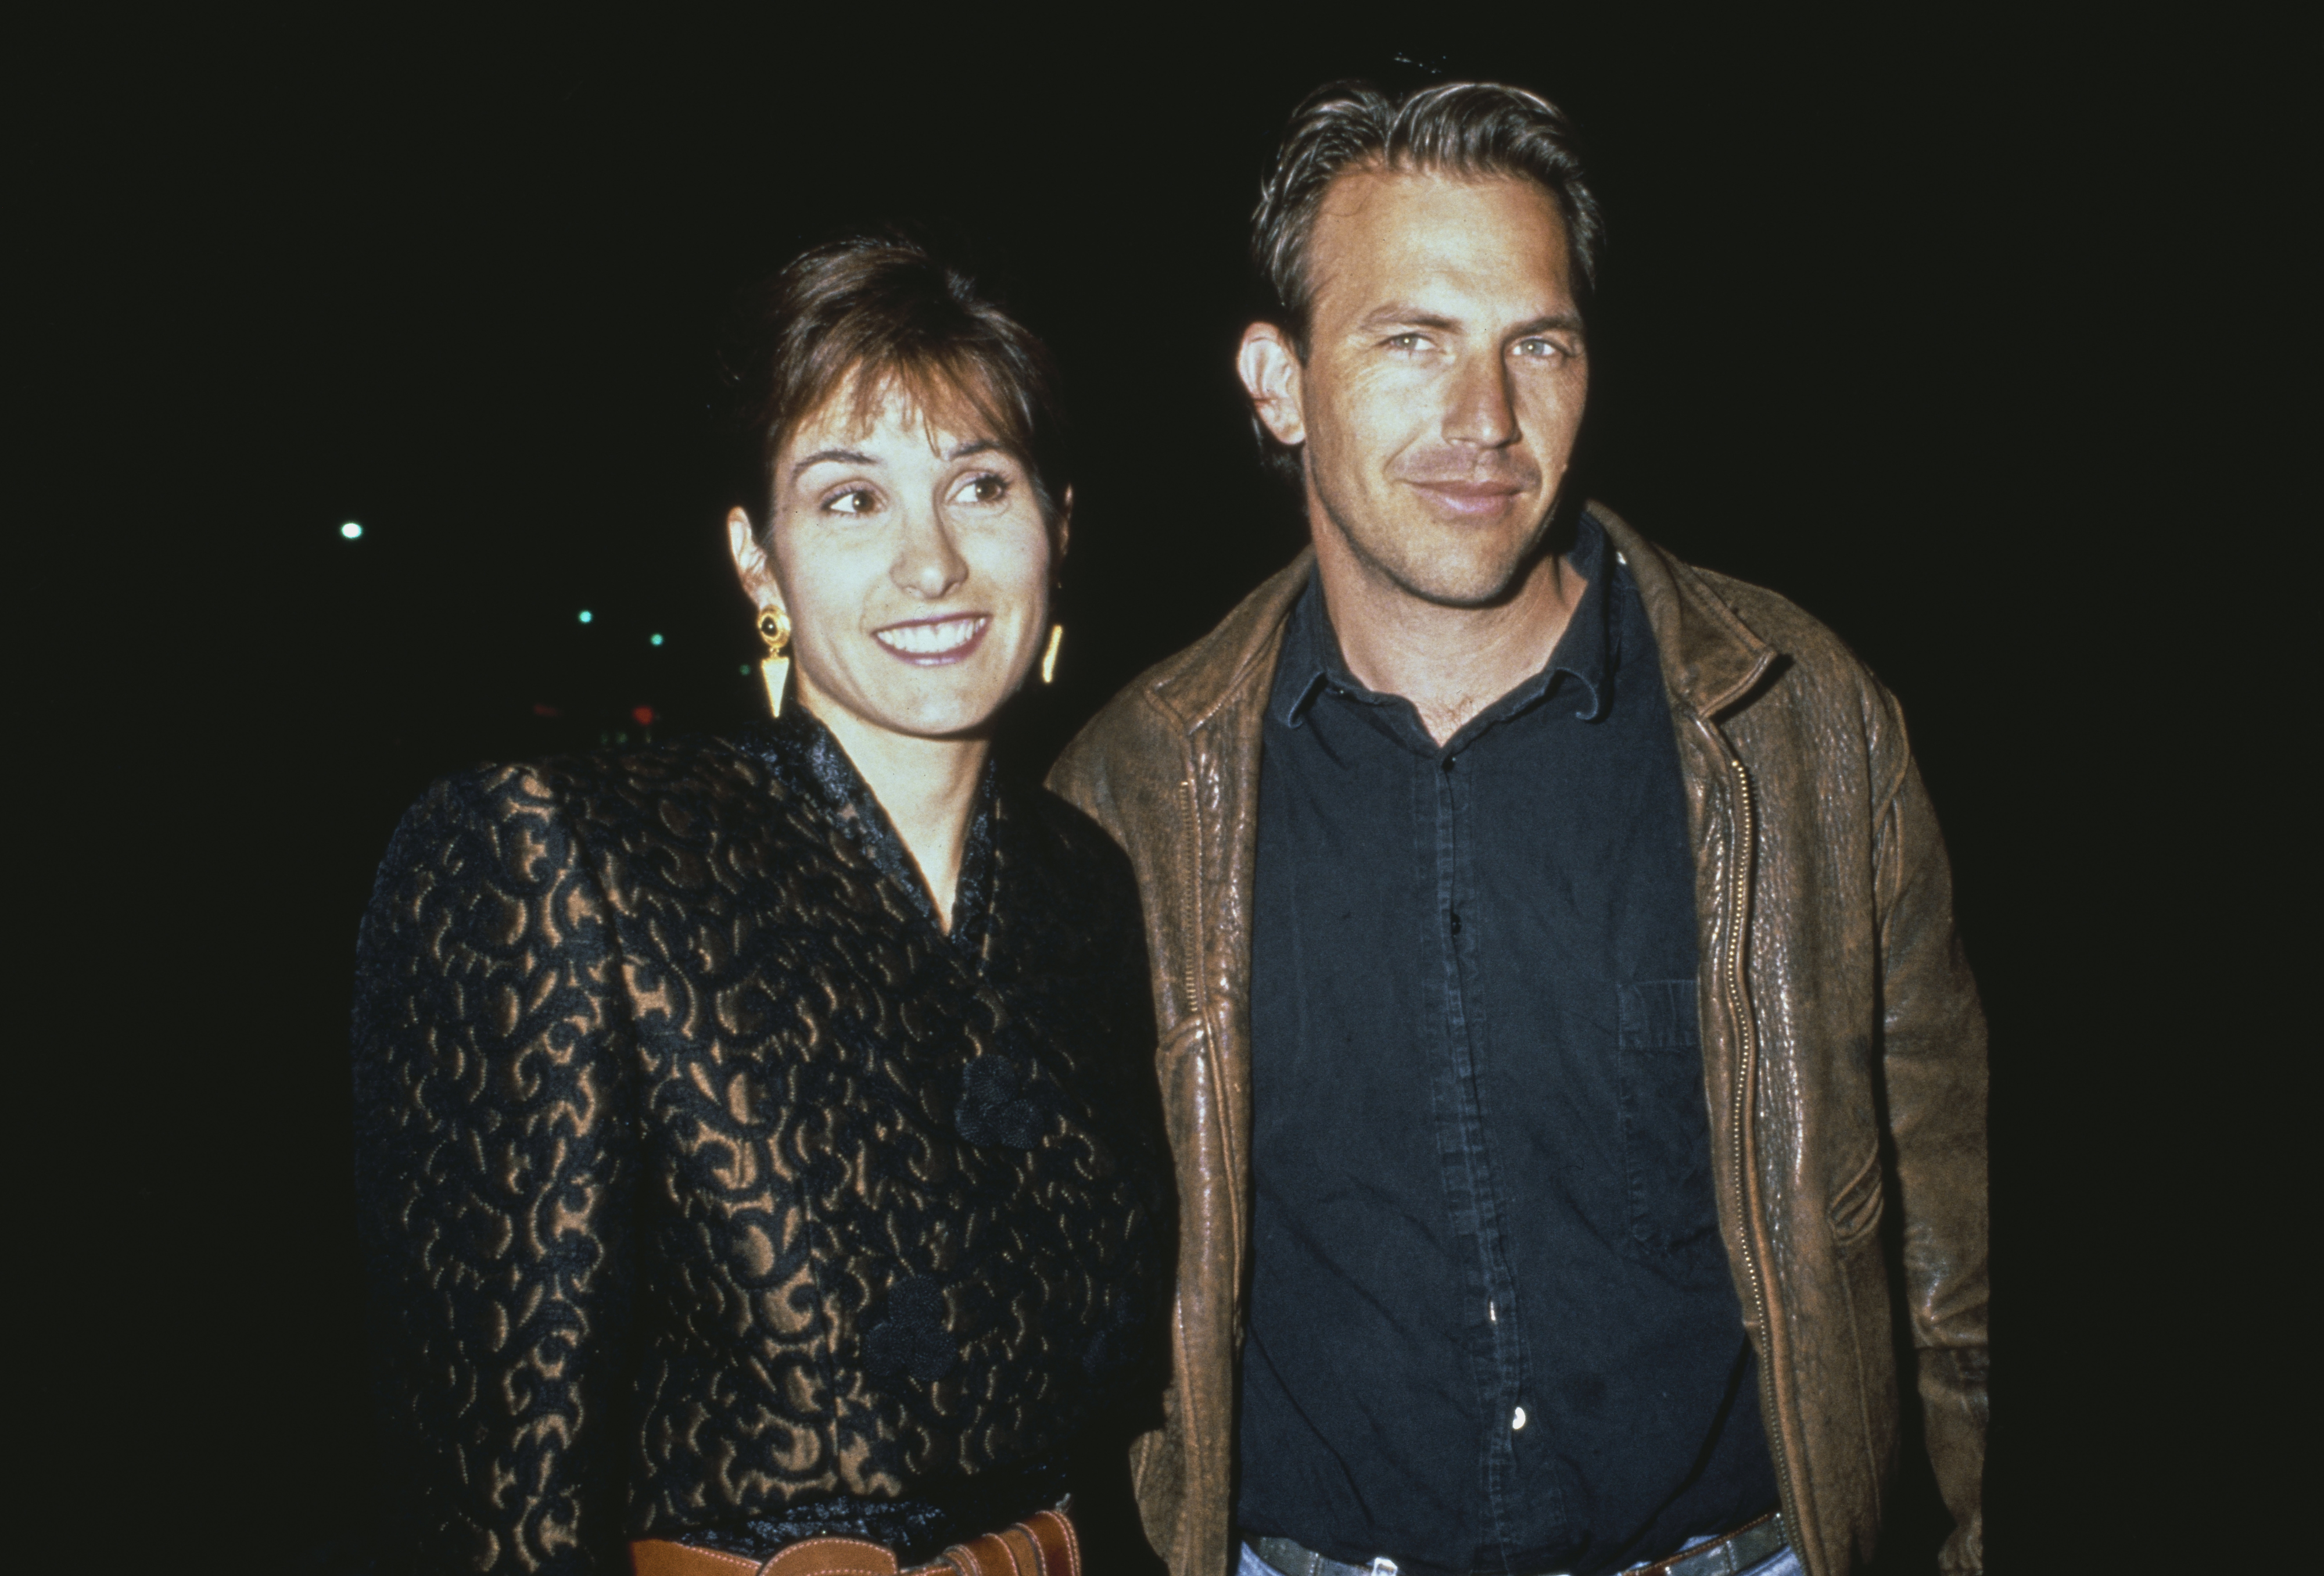 American actor and film director Kevin Costner with his wife Cindy Silva